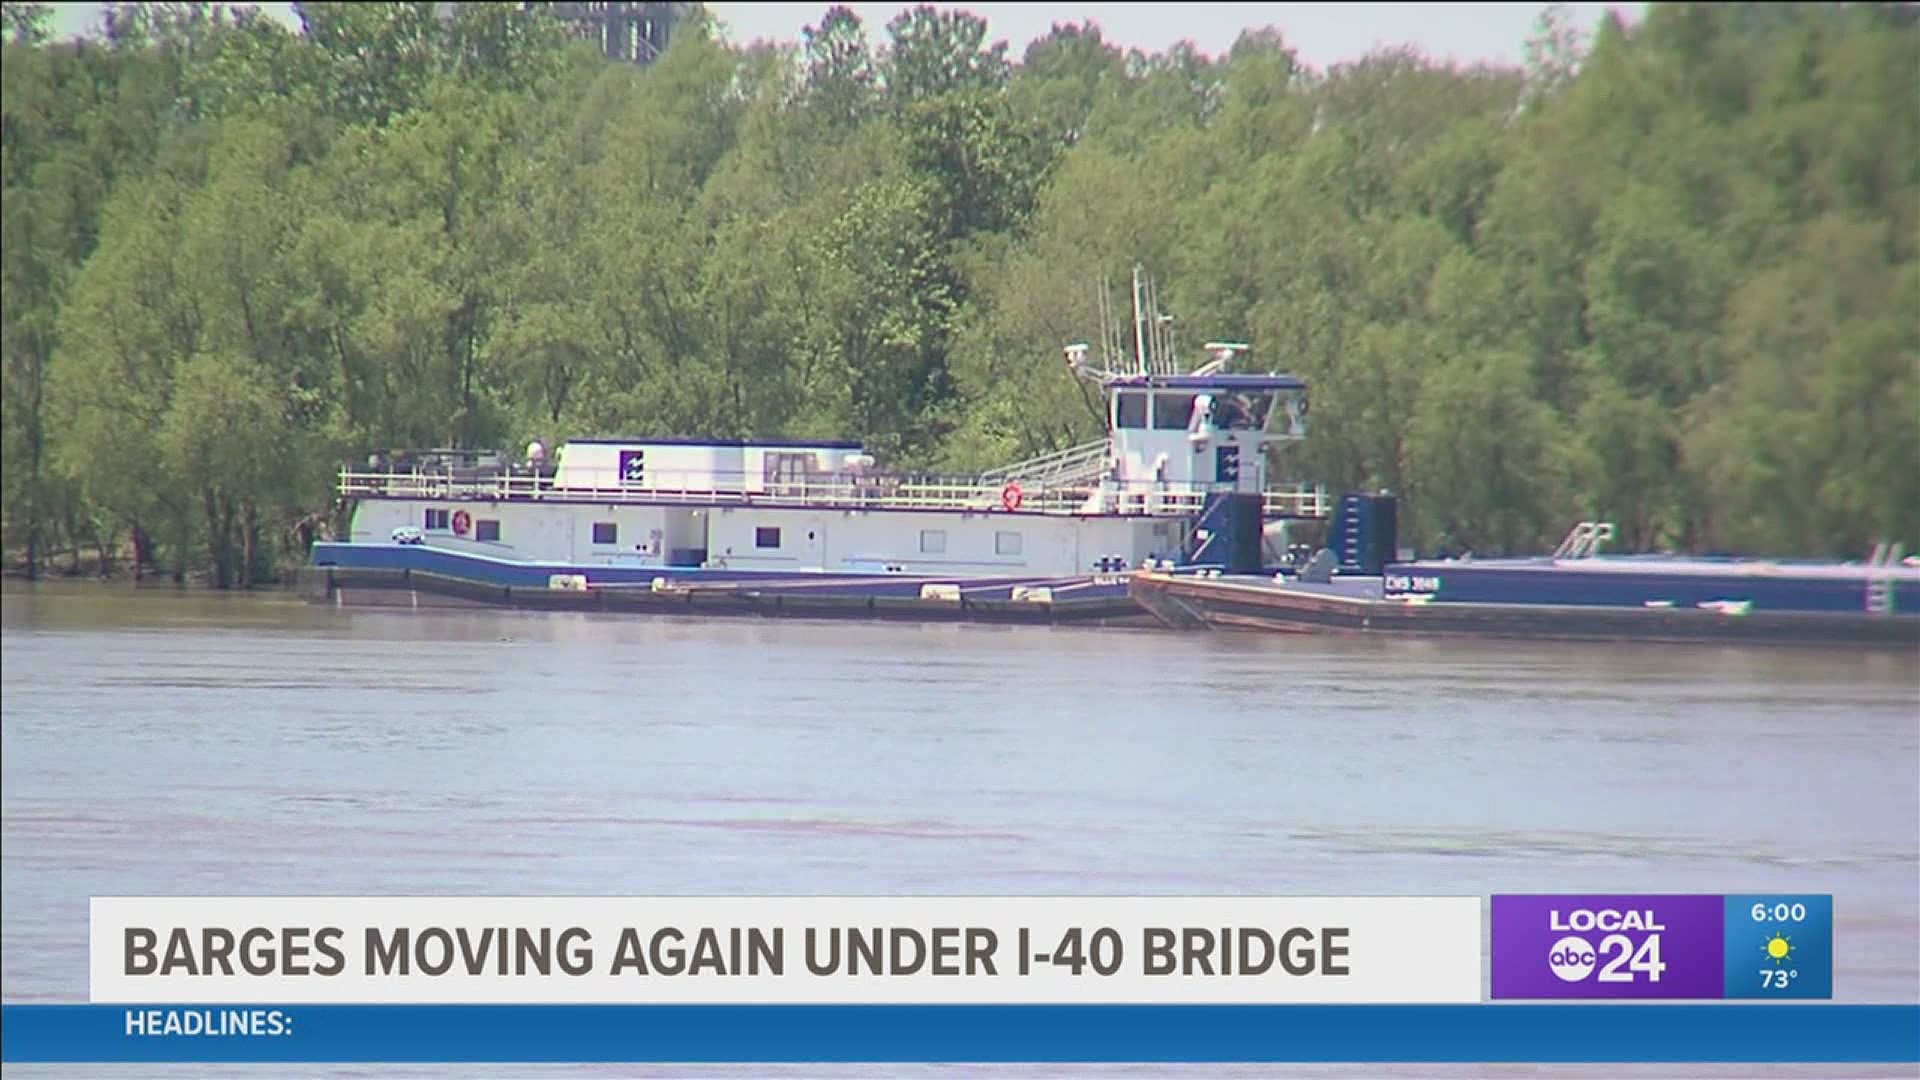 More than 1000 barges and 66 tugs were backed up along the river waiting for it to open after a crack was found in the I-40 Hernando de Soto bridge in Memphis.